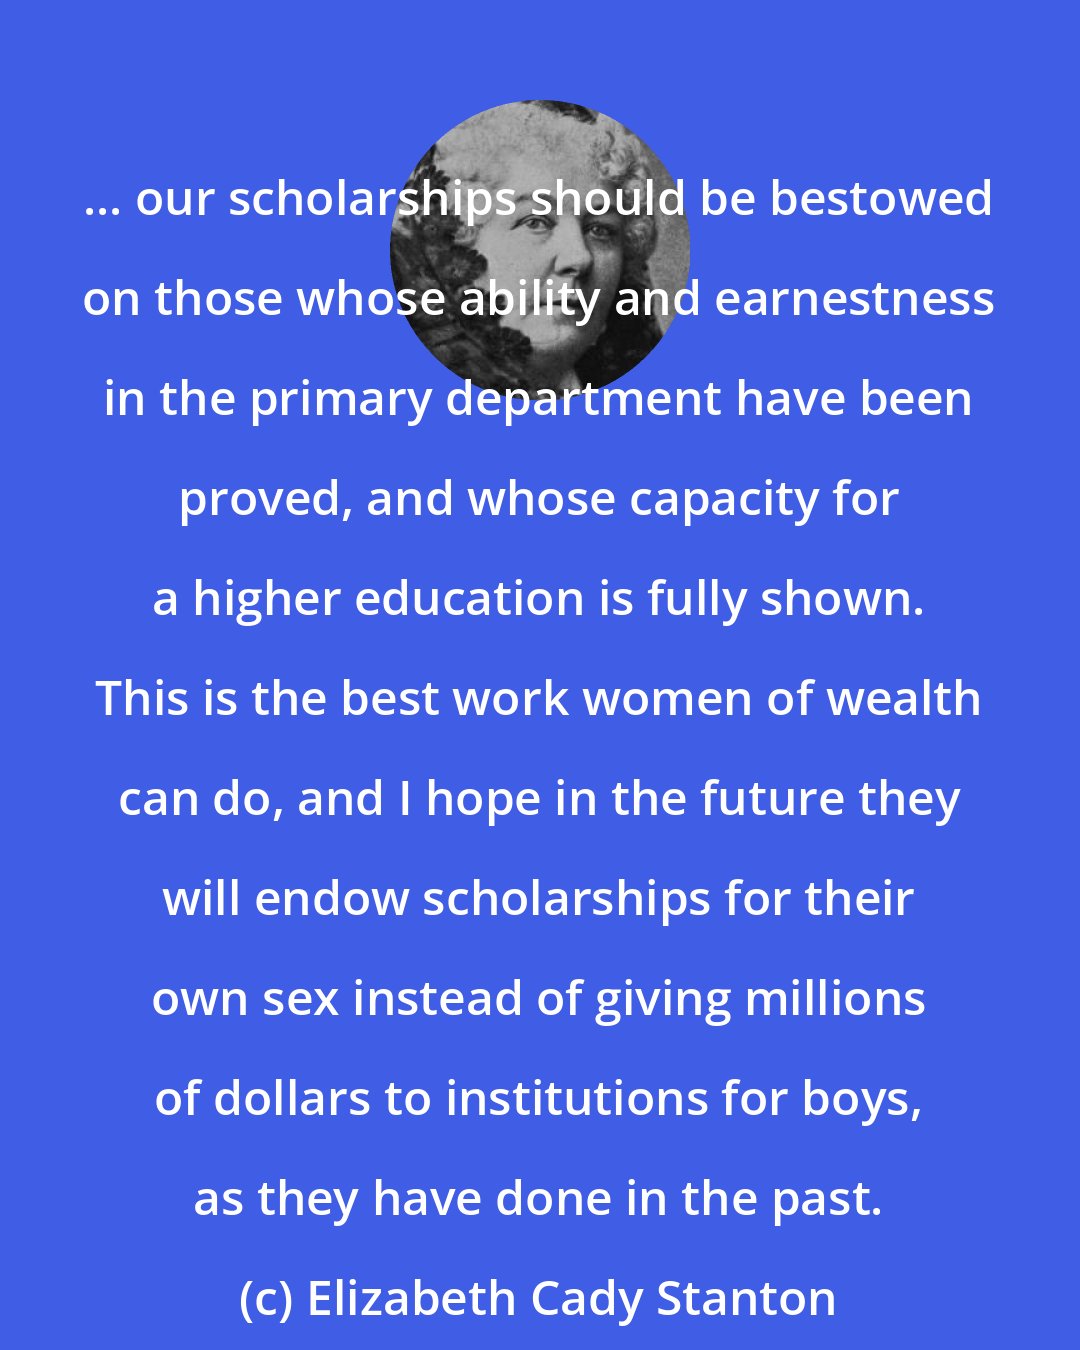 Elizabeth Cady Stanton: ... our scholarships should be bestowed on those whose ability and earnestness in the primary department have been proved, and whose capacity for a higher education is fully shown. This is the best work women of wealth can do, and I hope in the future they will endow scholarships for their own sex instead of giving millions of dollars to institutions for boys, as they have done in the past.